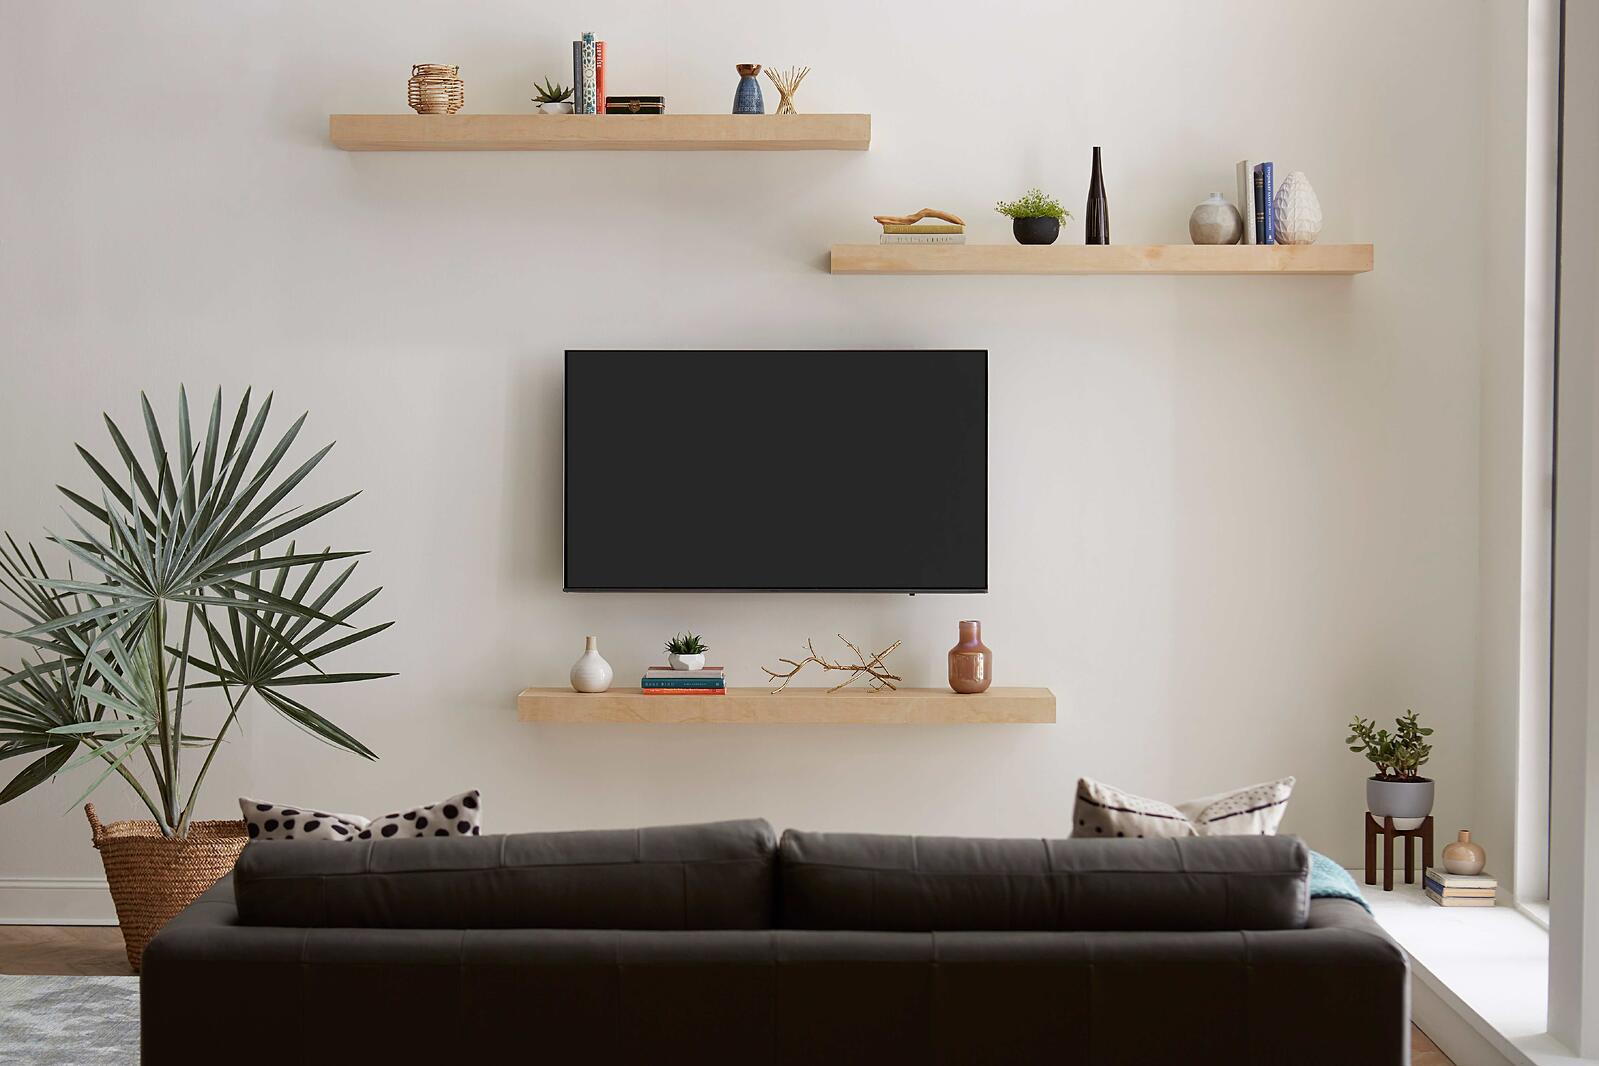 TV and Floating Shelves Mounted on Wall in Living Room